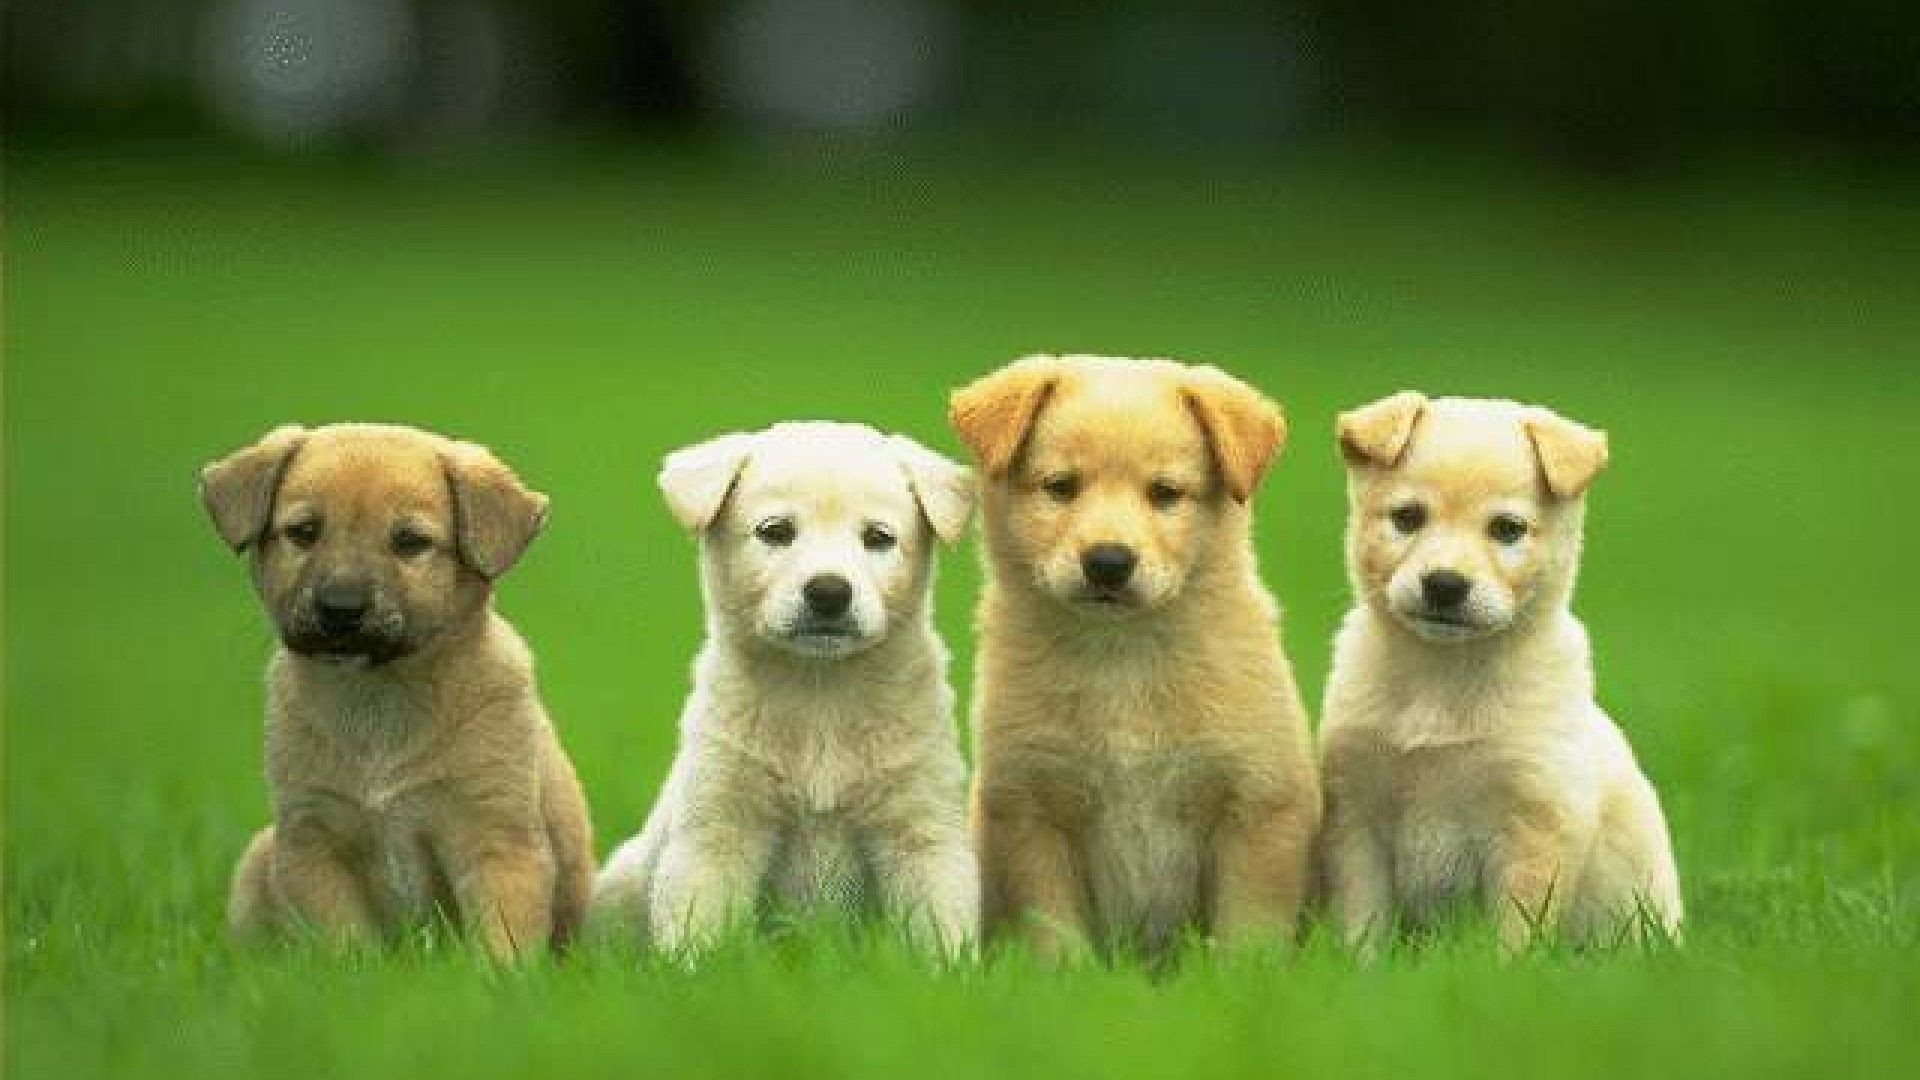 1920x1080 Cute and Funny Puppies Small Dog Image.